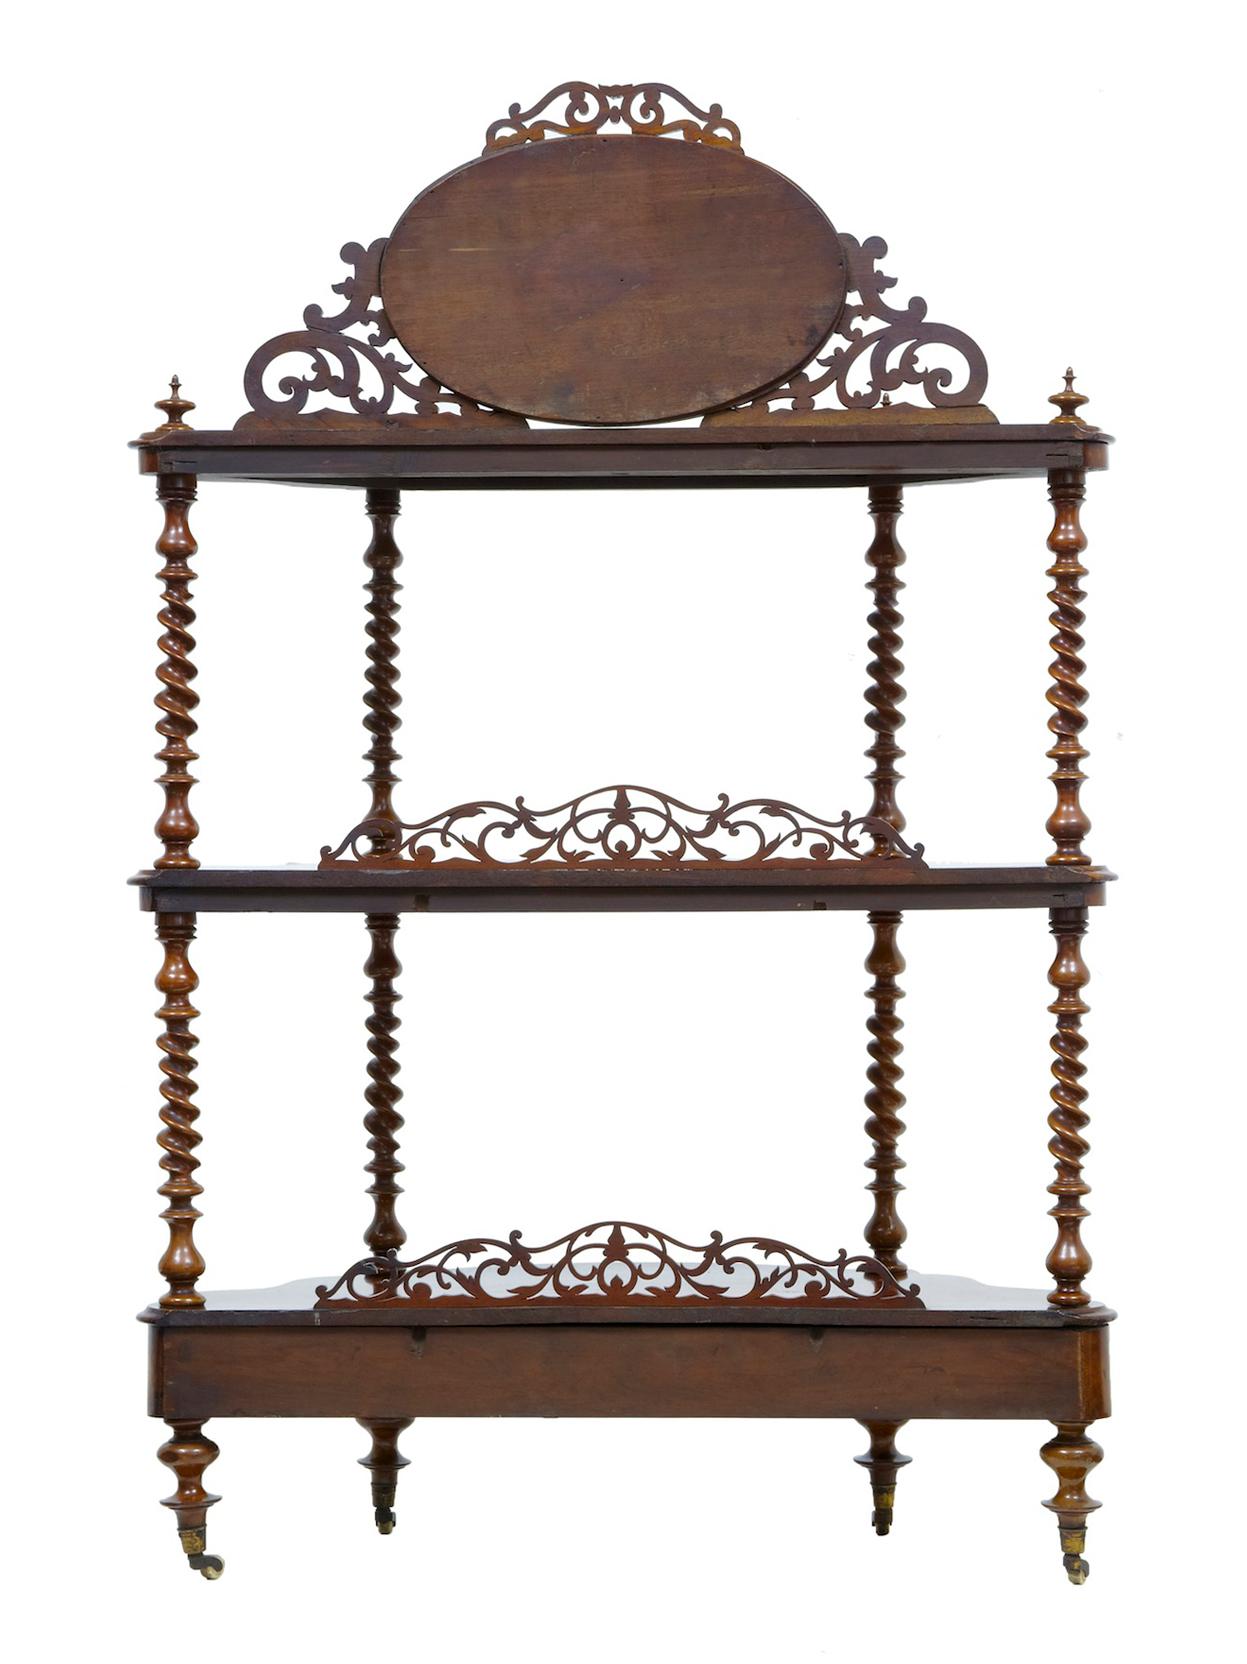 19th Century walnut Victorian what not stand, circa 1870.

Good quality walnut what not. Beautifully veneered in burr walnut. 3 Tiers, top tier with mirror and applied ornate carving. United by turned twists. Drawer in the base, standing on